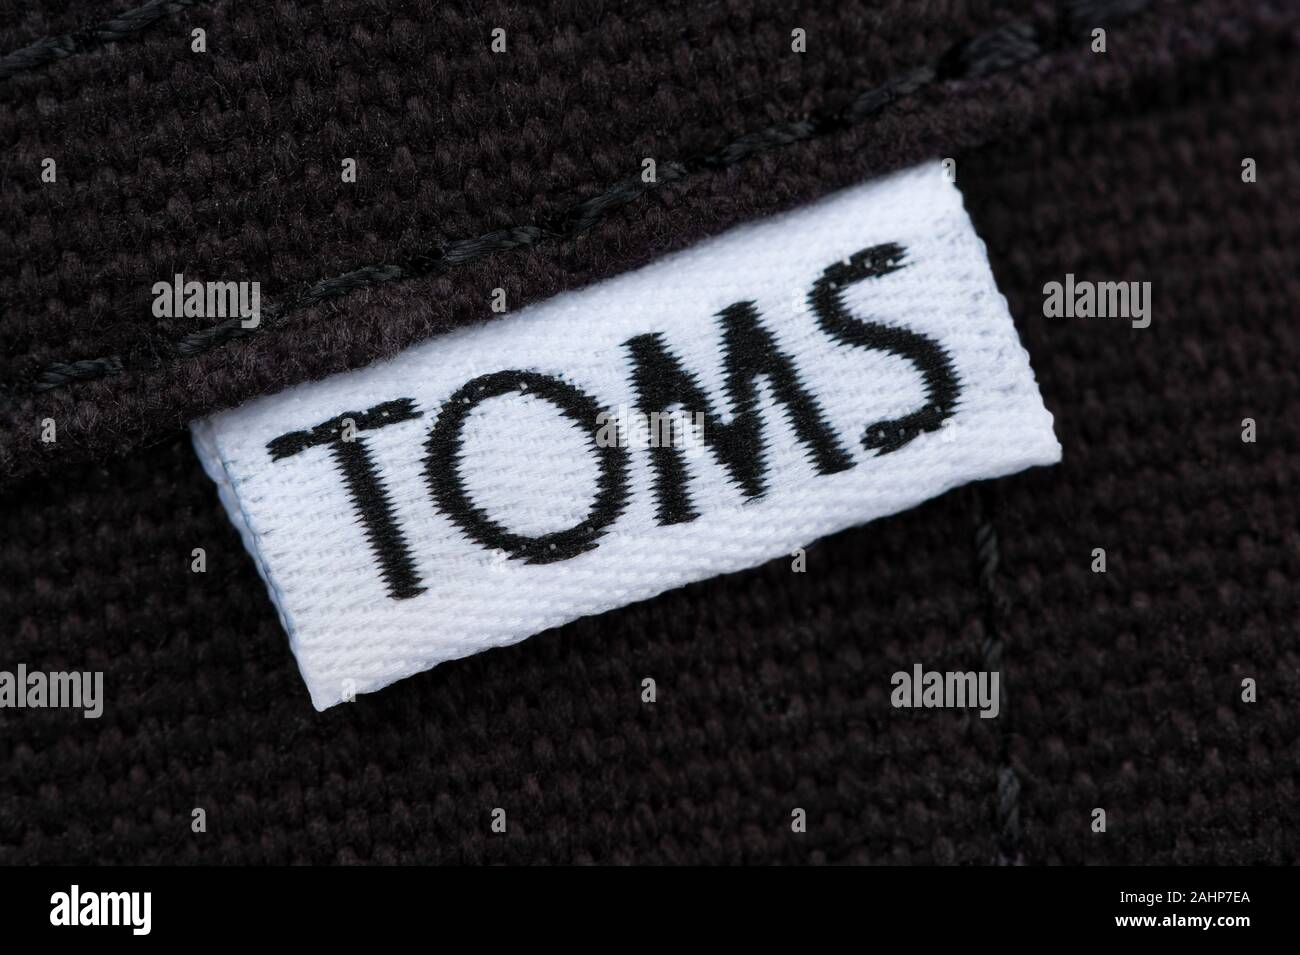 The Toms Shoes wordmark stitched onto a label which appears on the side of one of the company's footwear products. Stock Photo